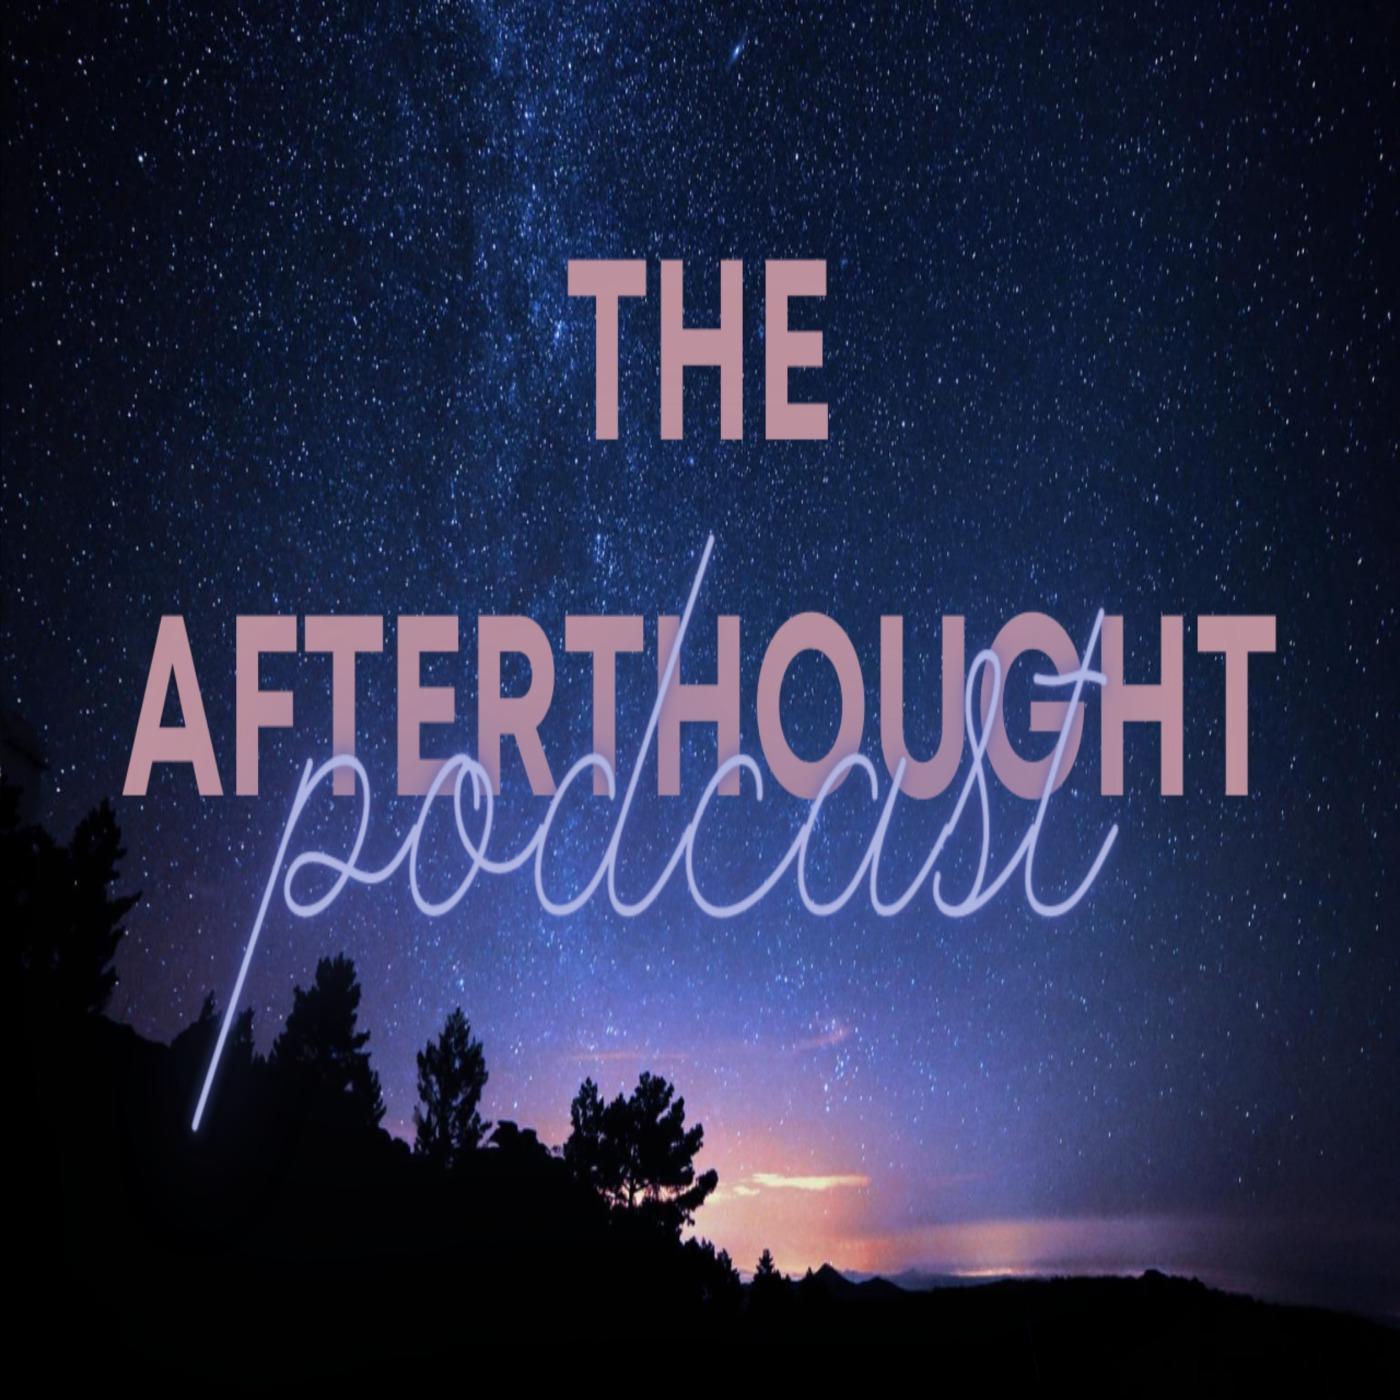 The Afterthought Podcast